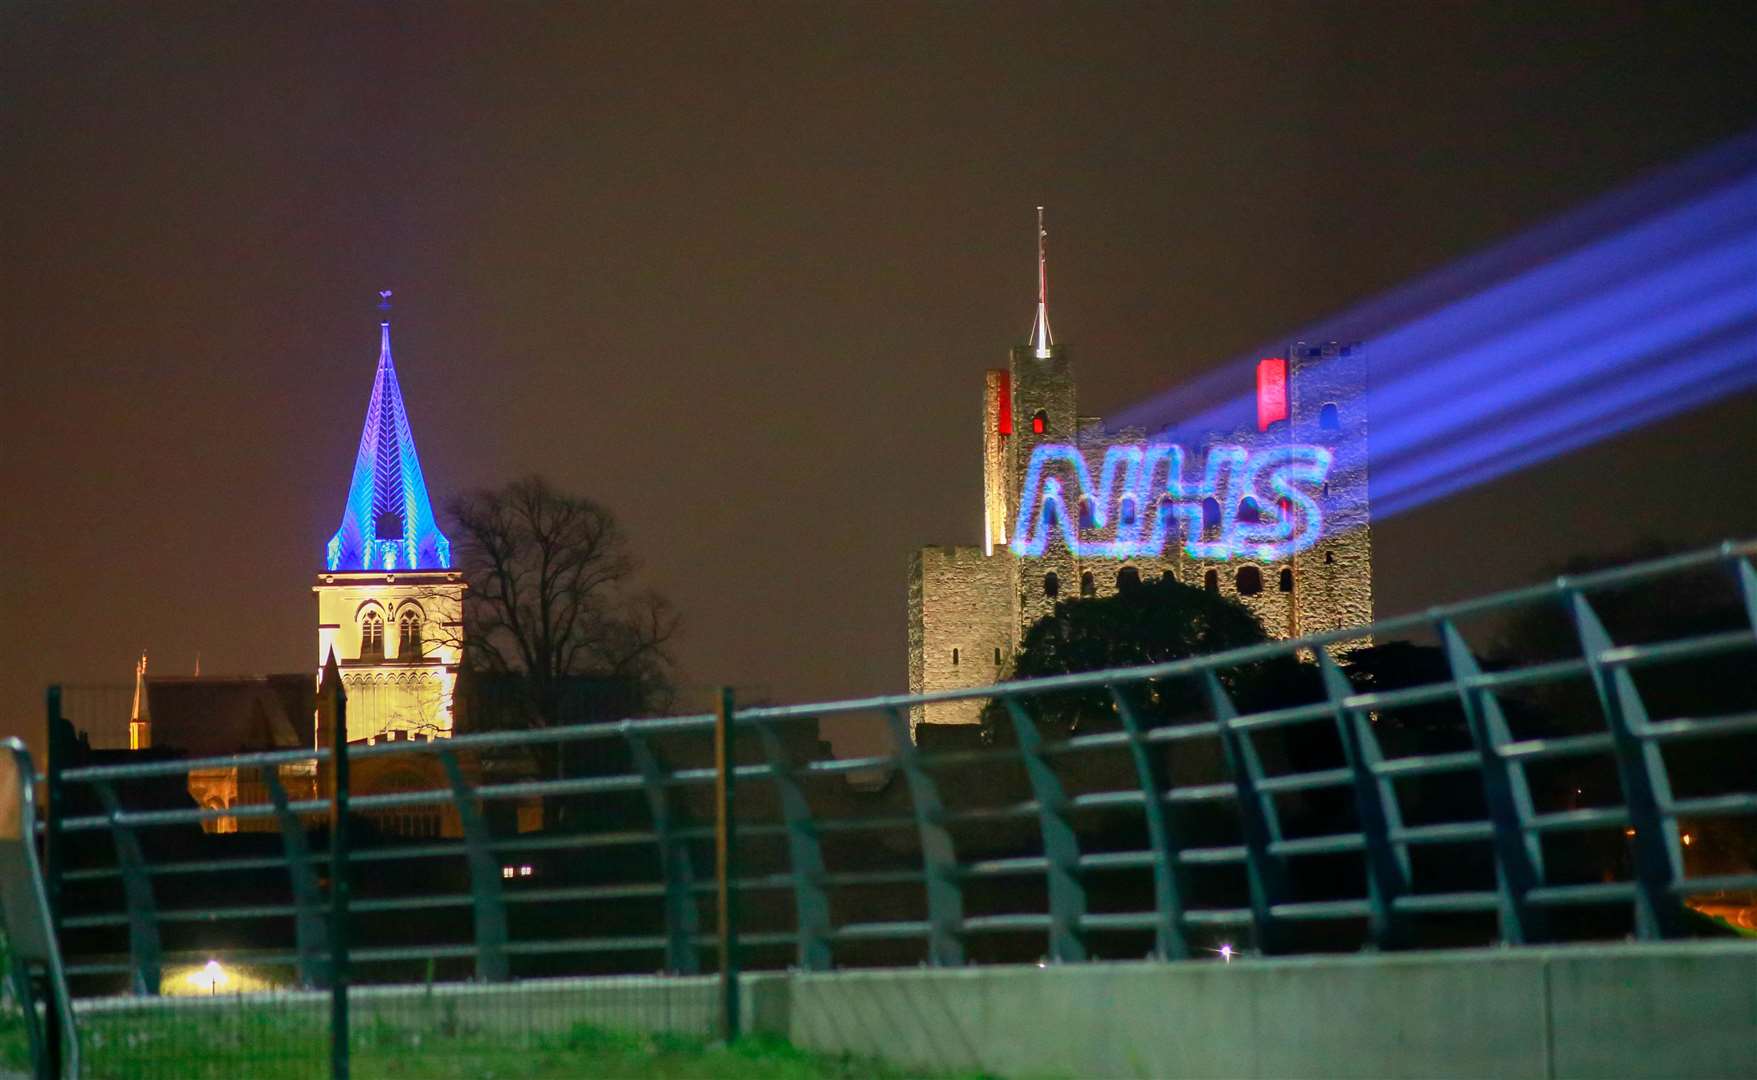 The NHS logo beamed onto the side of Rochester Castle for the Clap for Carers event